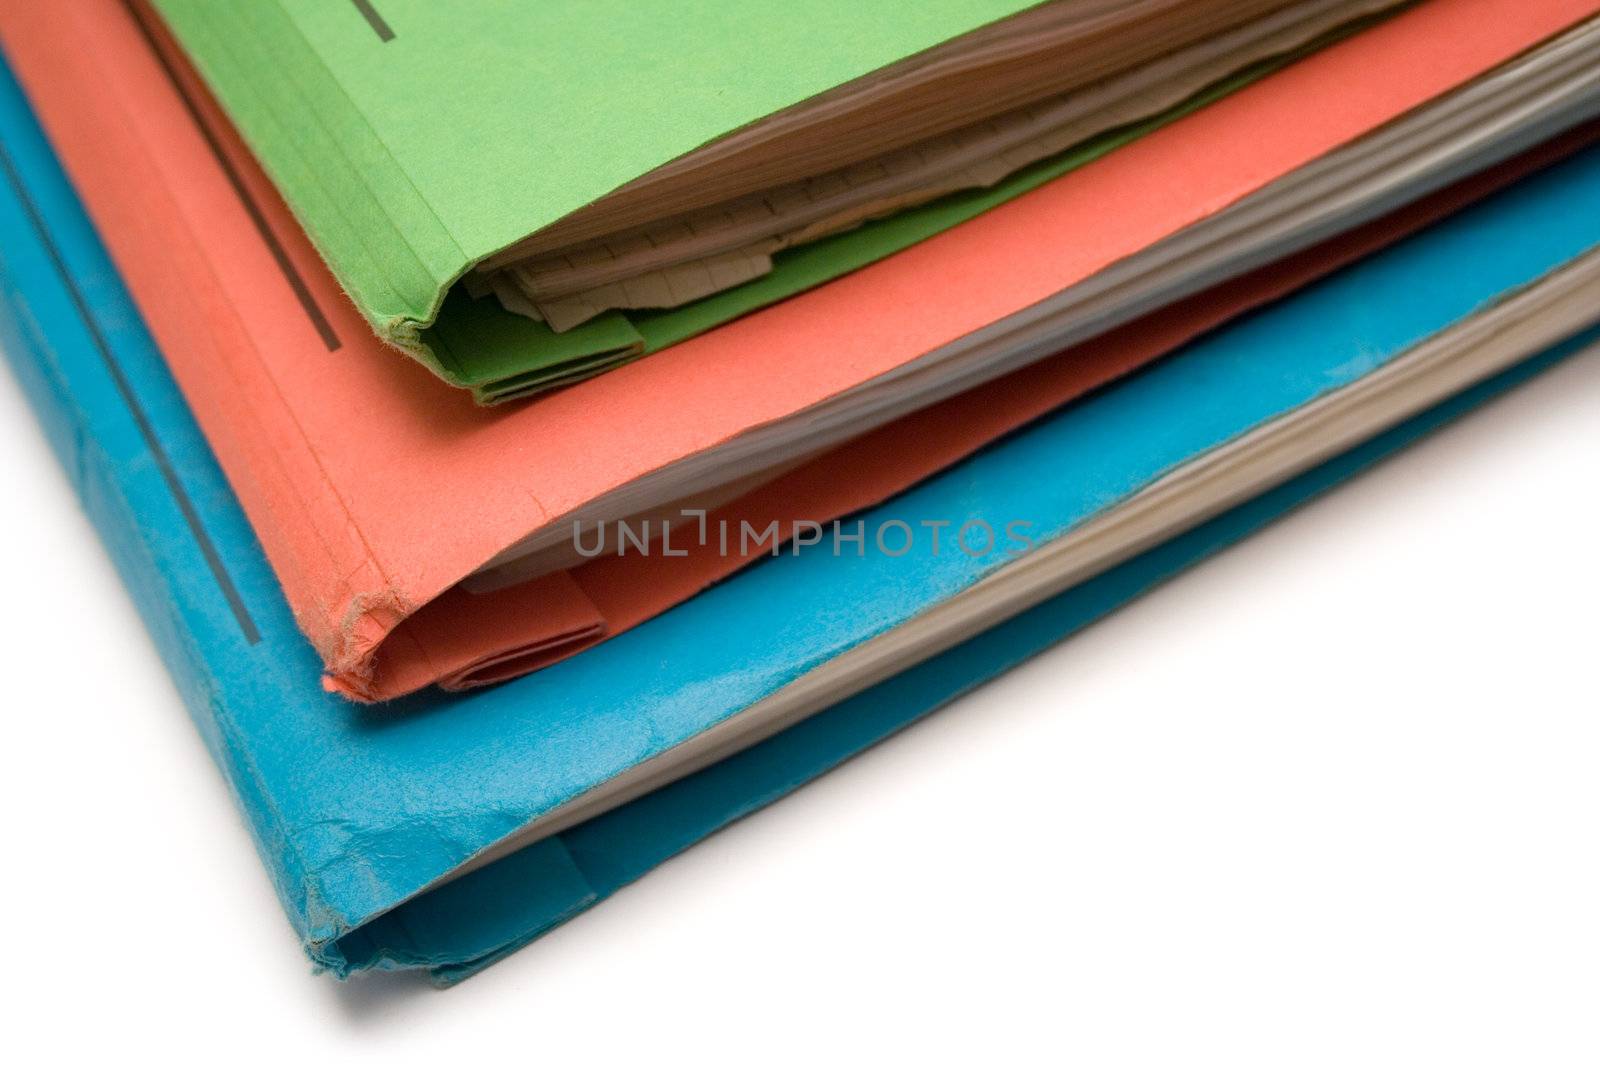 Stacked colored binders isolated on a white background.